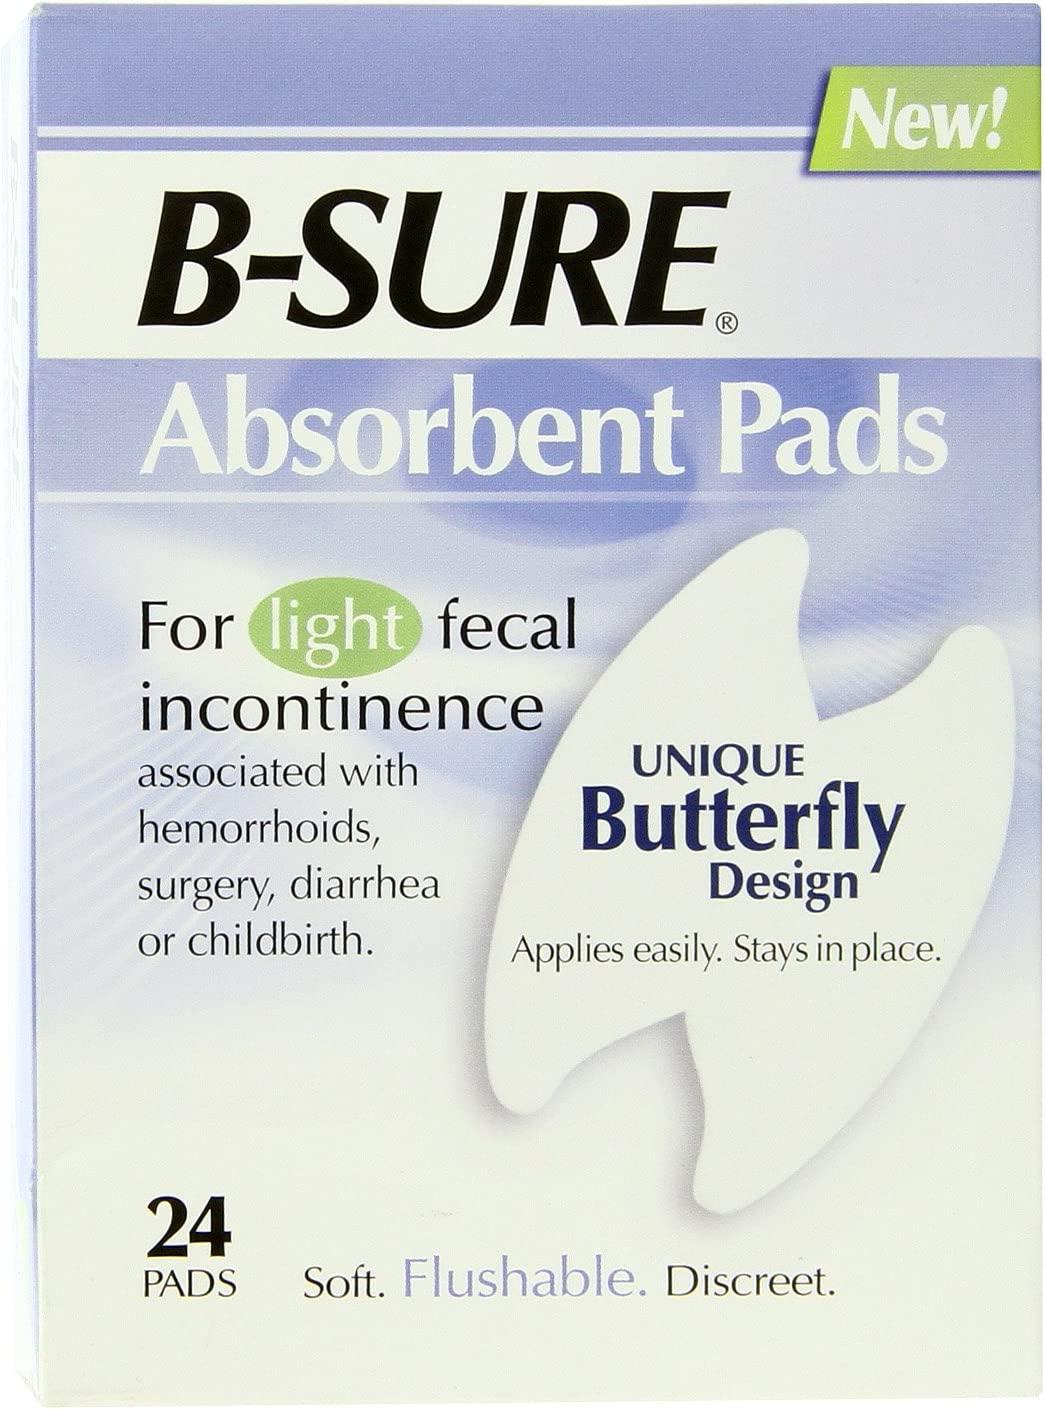 B-Sure Anal Leakage Pads, Case/288 (12 Boxes of 24 pads) 